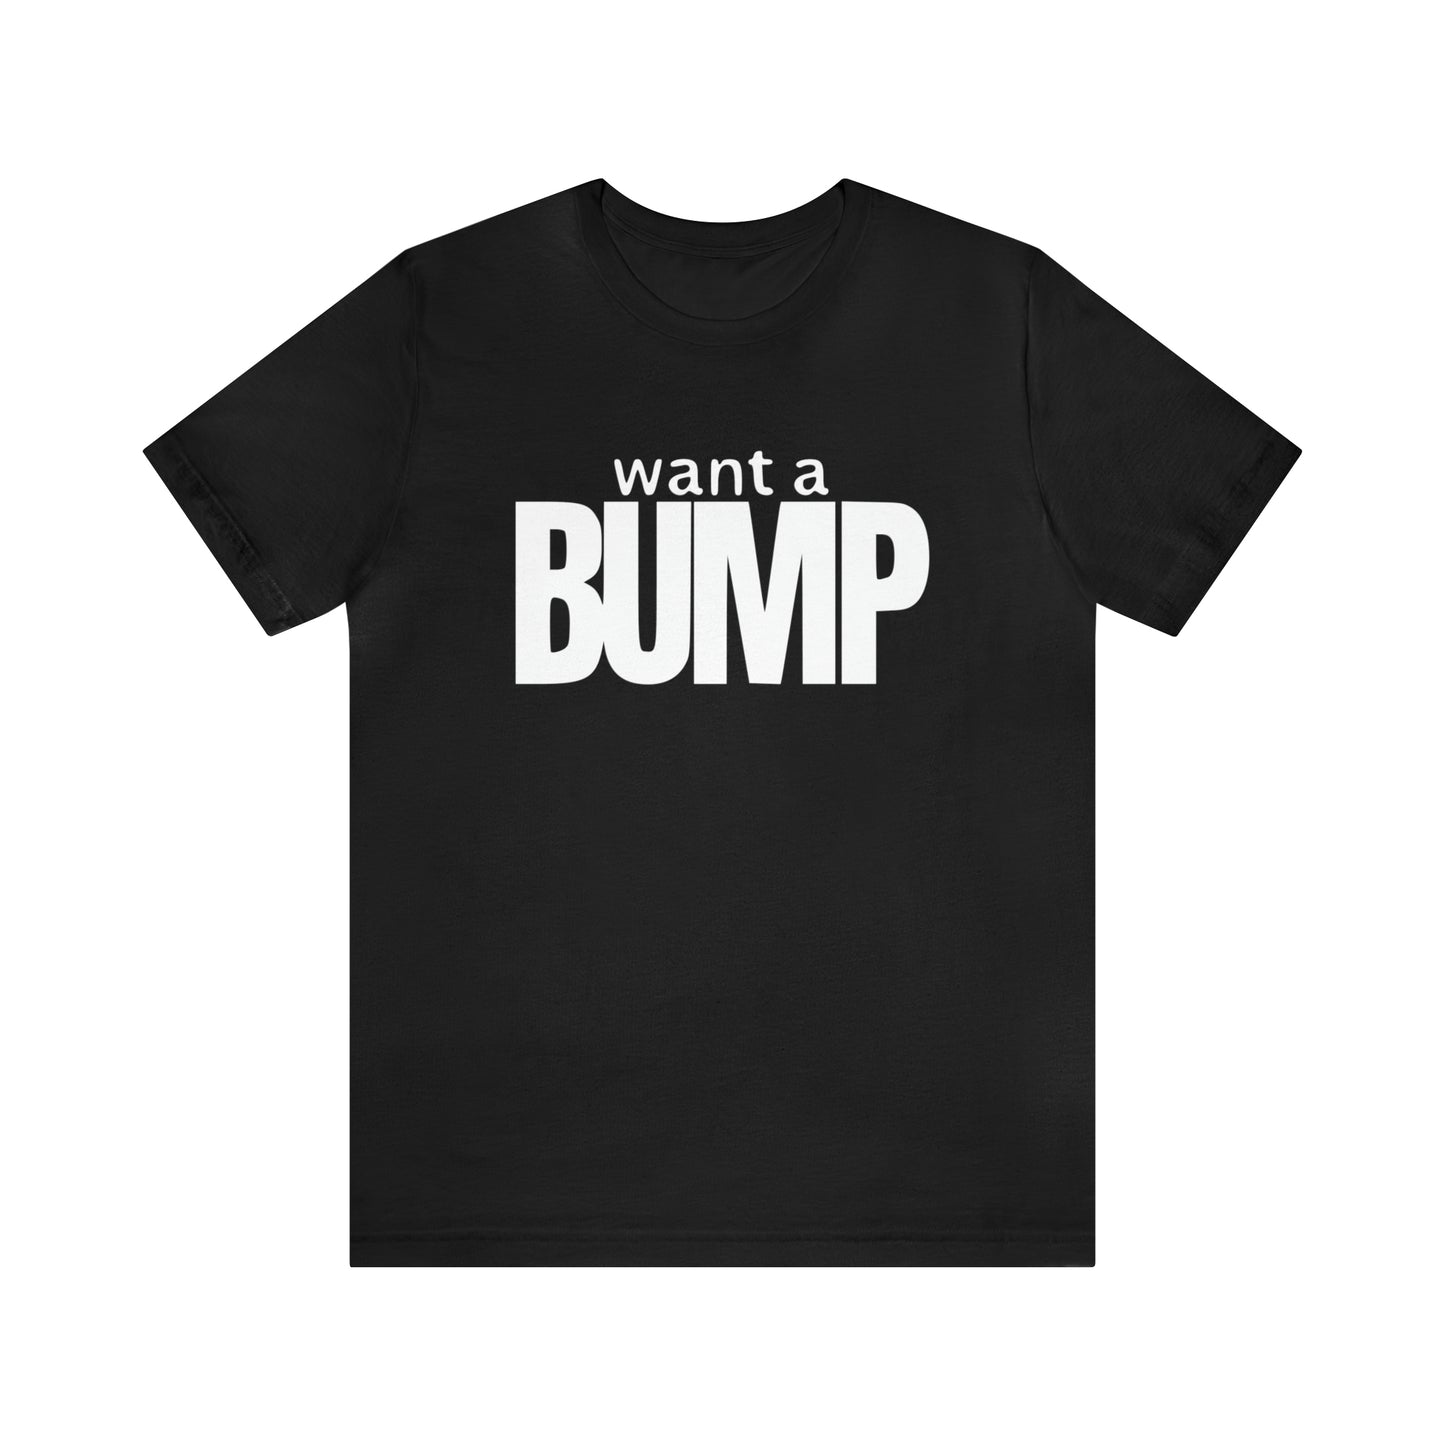 Want A BUMP™ The Daily Grind T-shirt